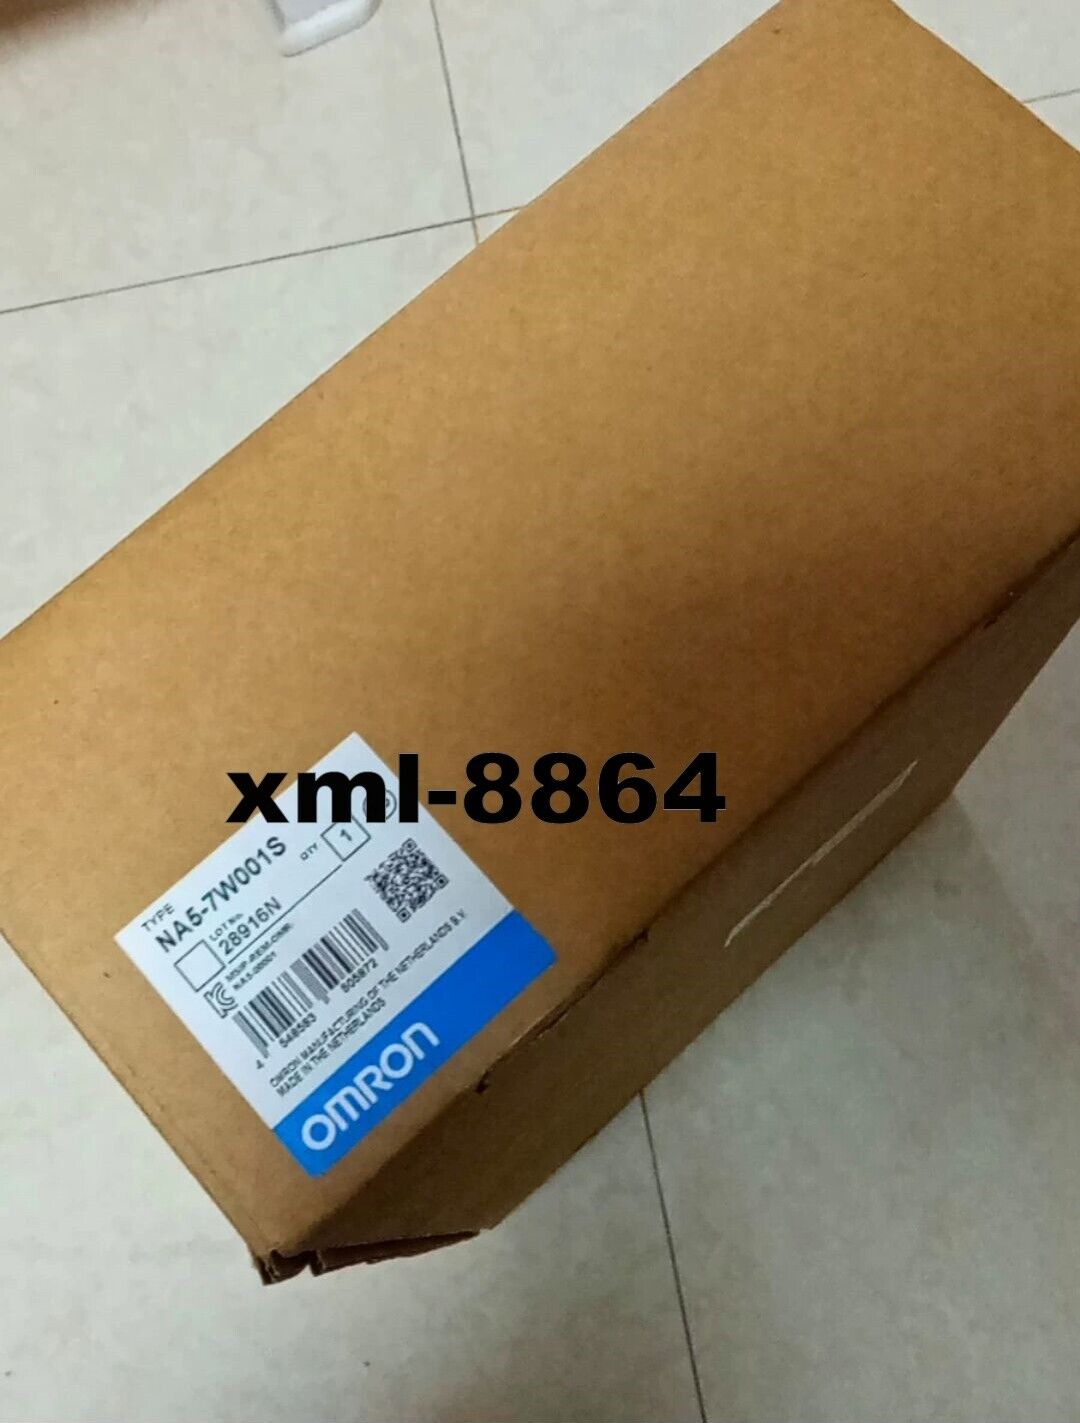 Na5-7w001s Omron Touch Screen Brand New In Box Fast Shipping By Dhl